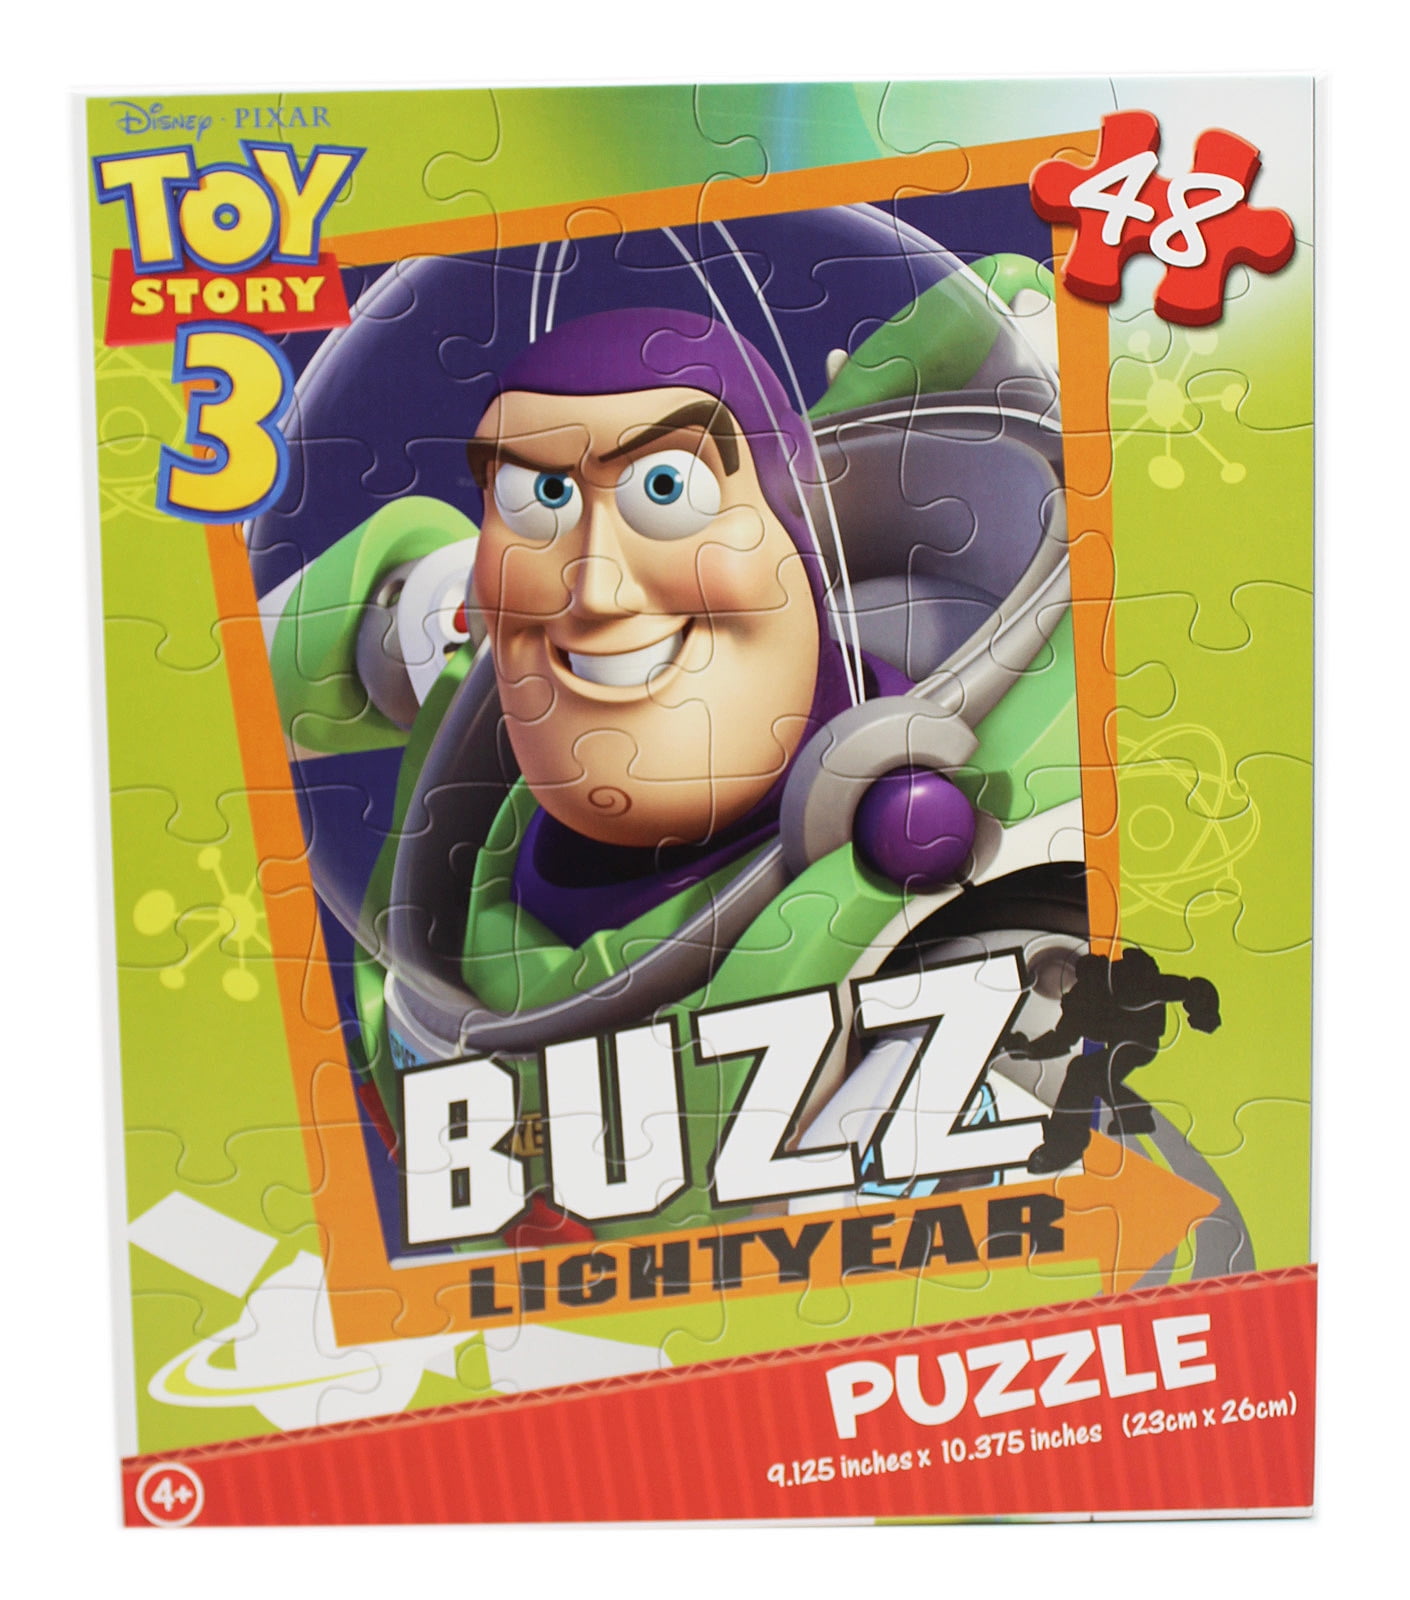 Details about   Set of Three Toy Story Puzzles 48 Pieces jigsaw puzzle 